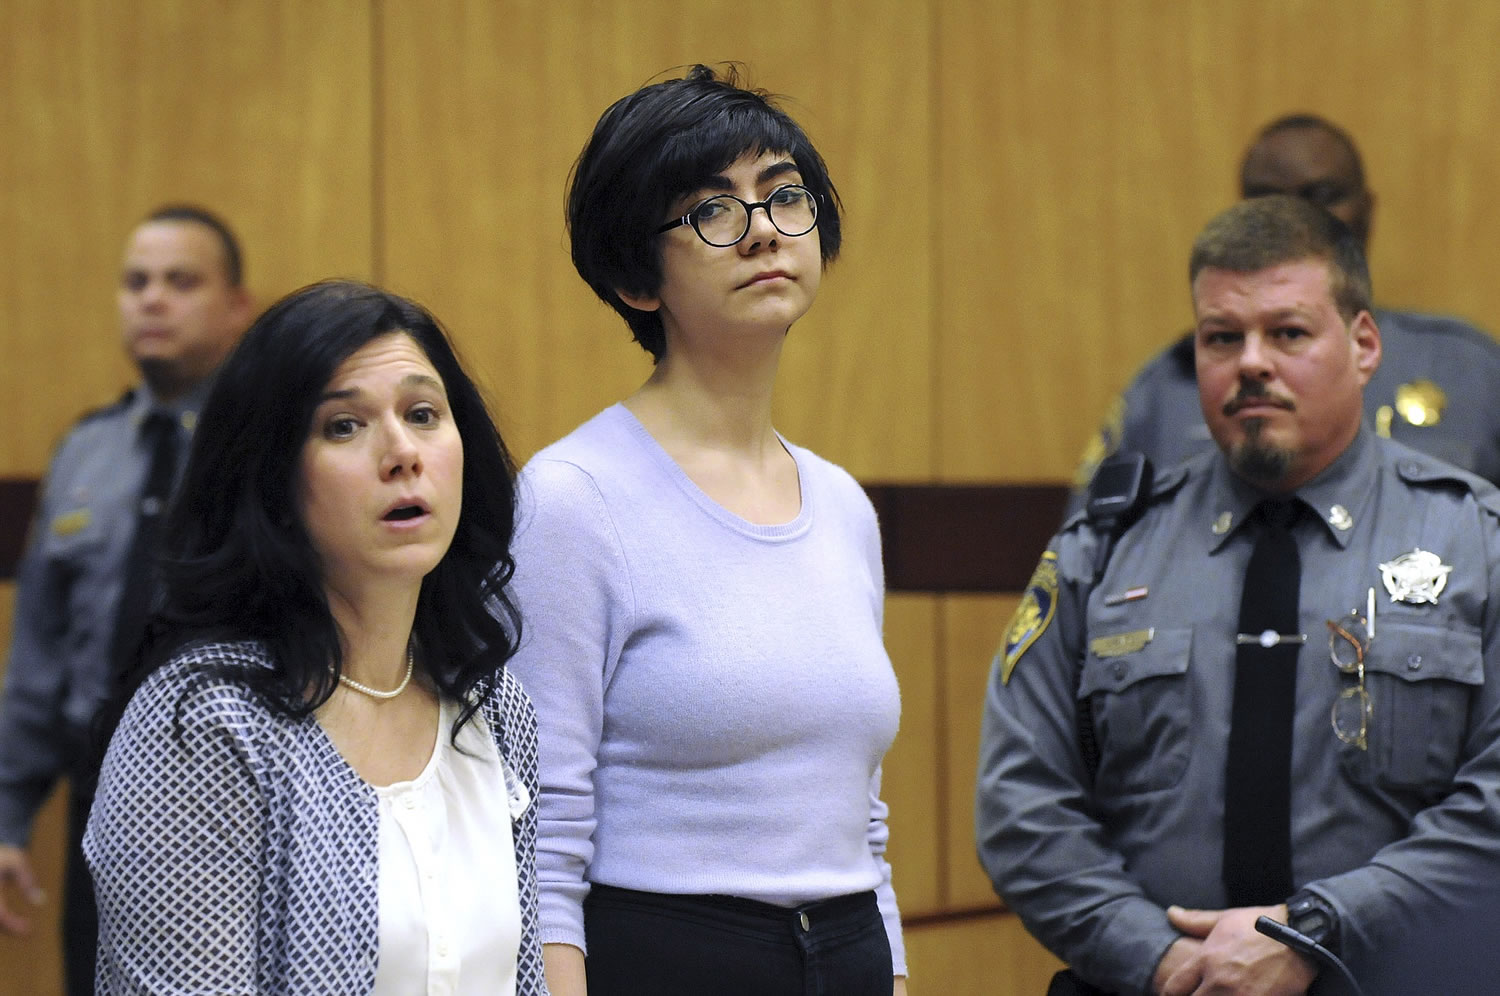 Wesleyan University sophomore Rama Agha Al Nakib, 20, center, stands during her arraignment Wednesday in Middletown, Conn., for possession of controlled substances and other charges.